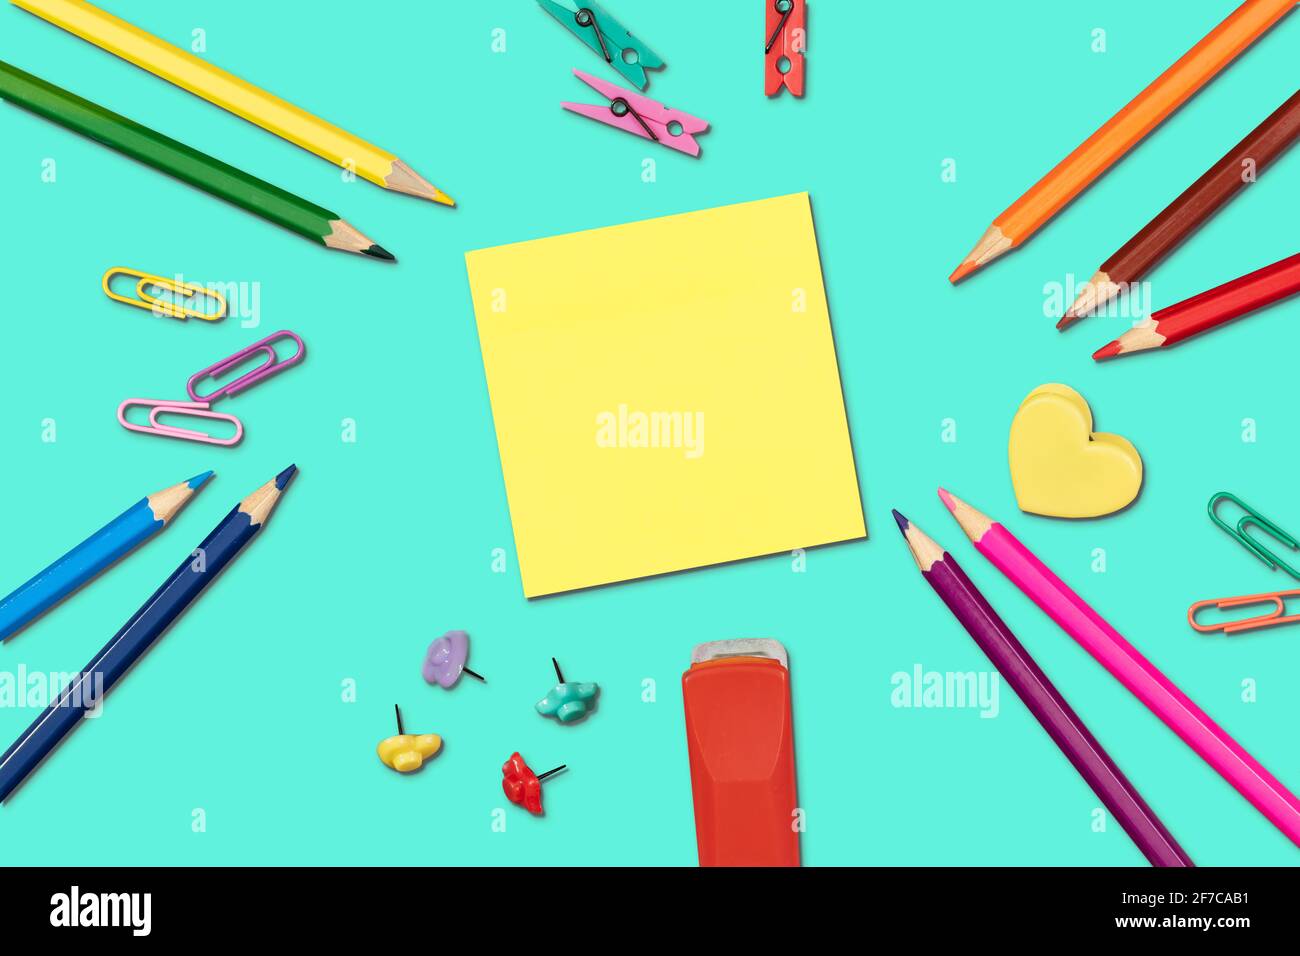 Bright back to school supplies with yellow sticky note on turquoise background. Flat lay. Stock Photo